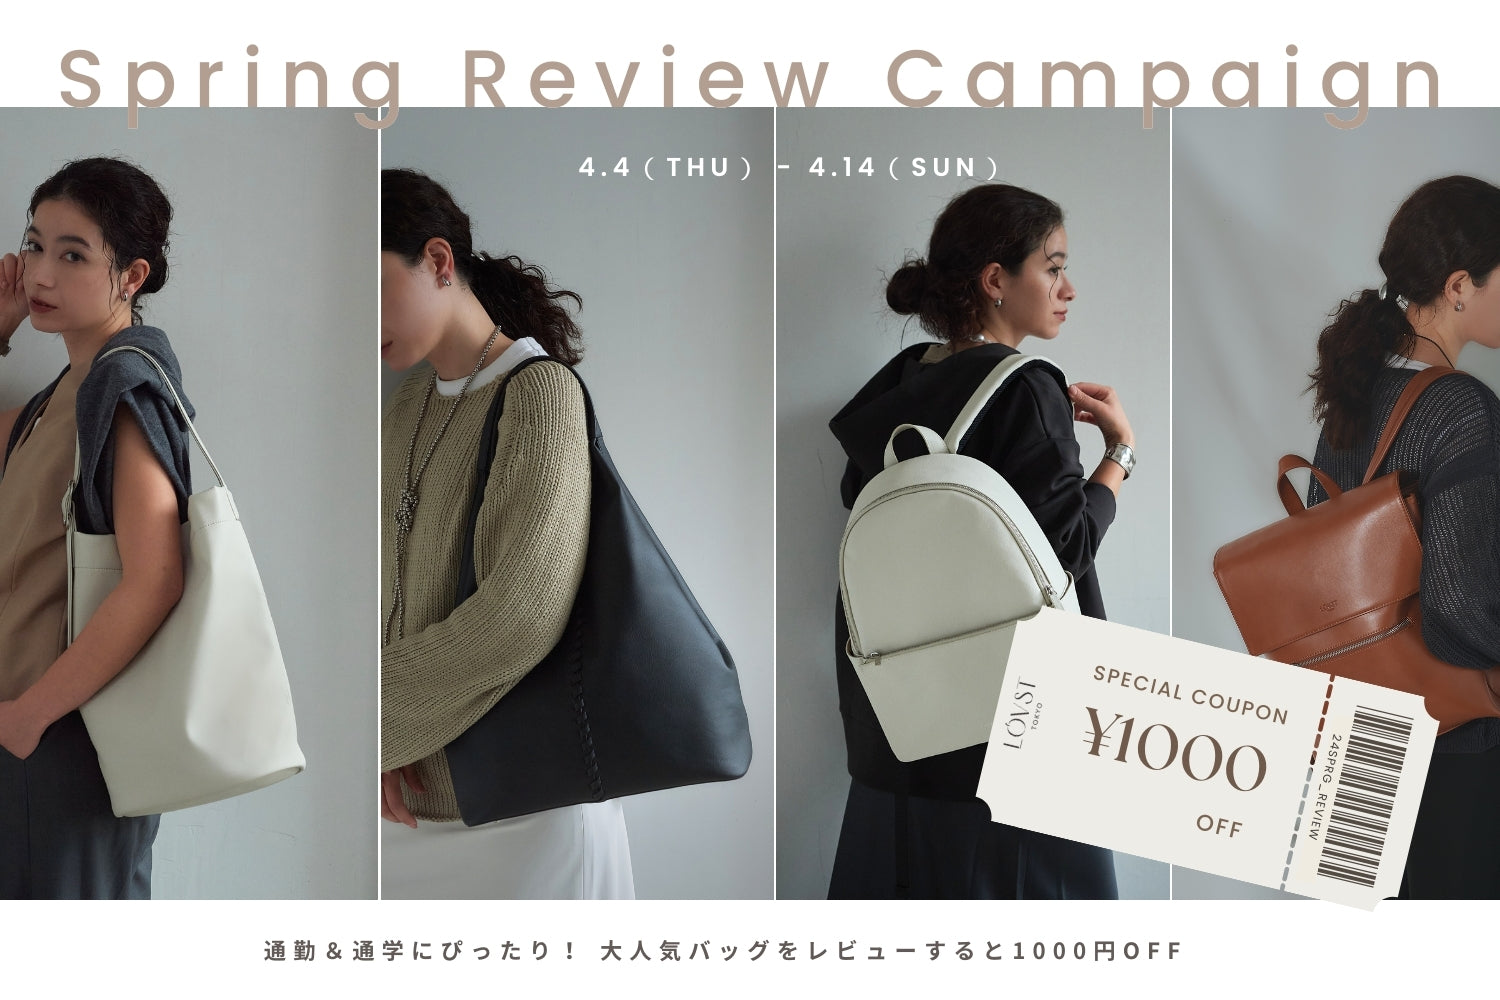 「Spring Review Campaign」で通勤・通学バッグが1000円OFF！